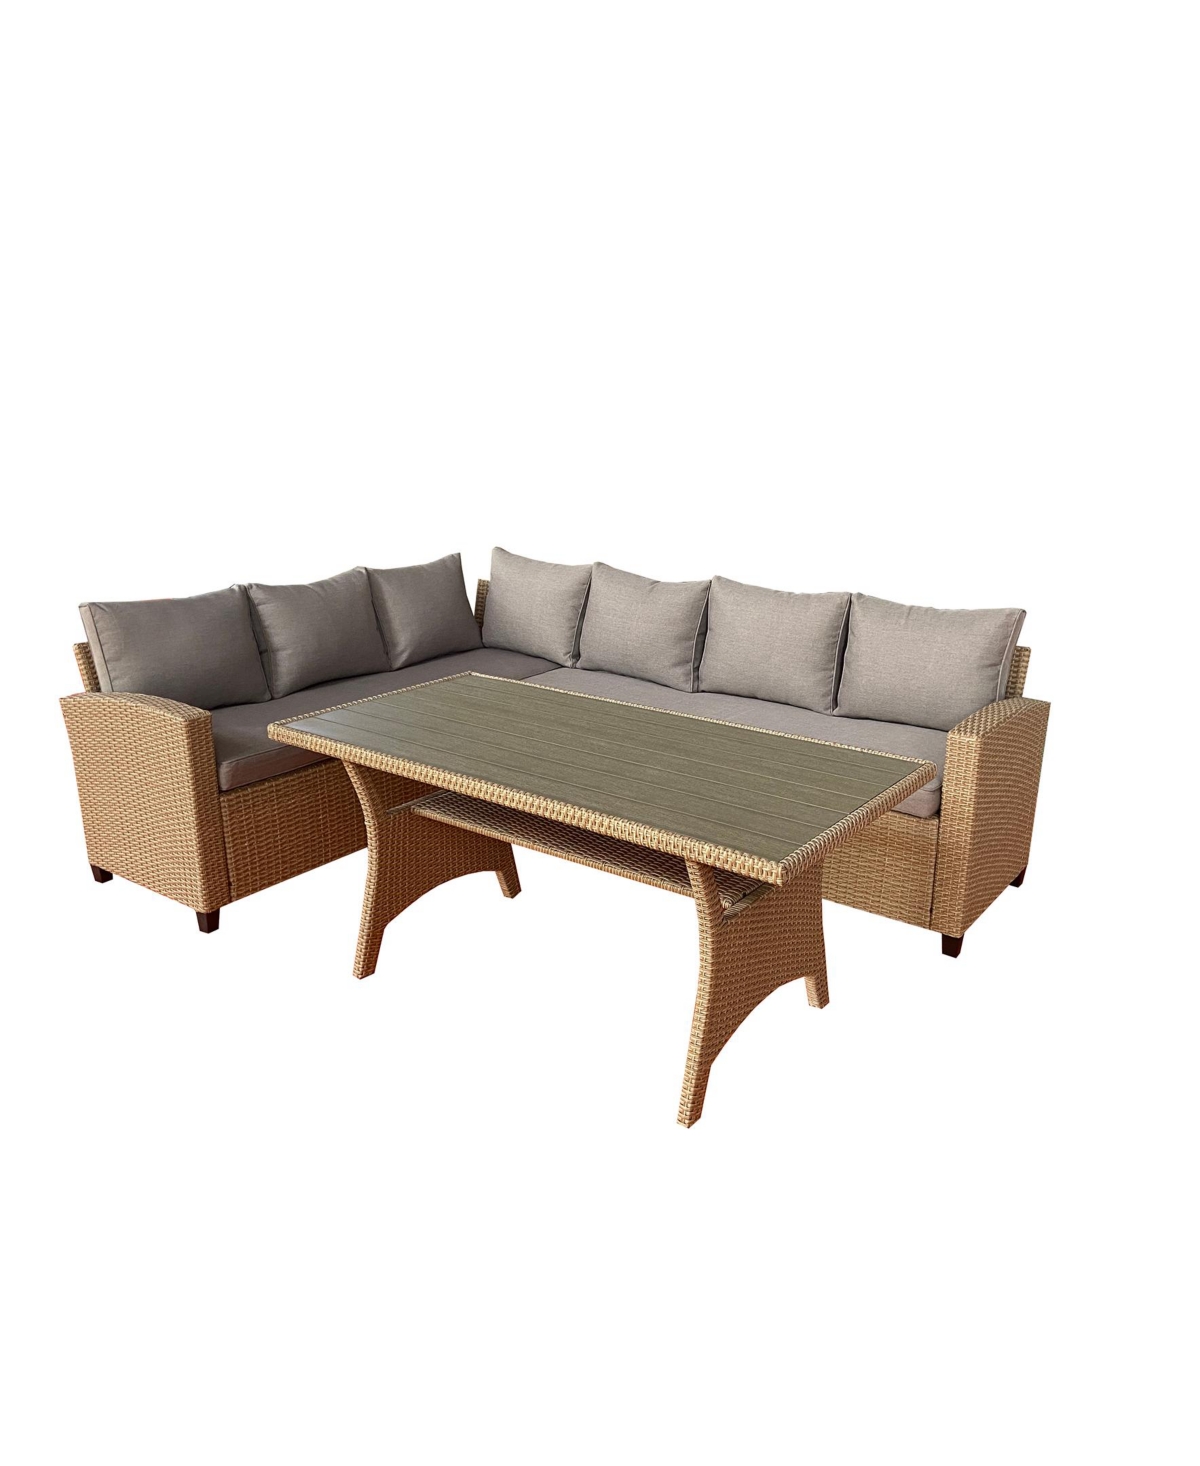 Unique Furniture 2 Piece Polyester, Polyester Blend, Rattan, Steel Six Seater Lounge Sofa And Outdoor Furniture Patio In Neutral